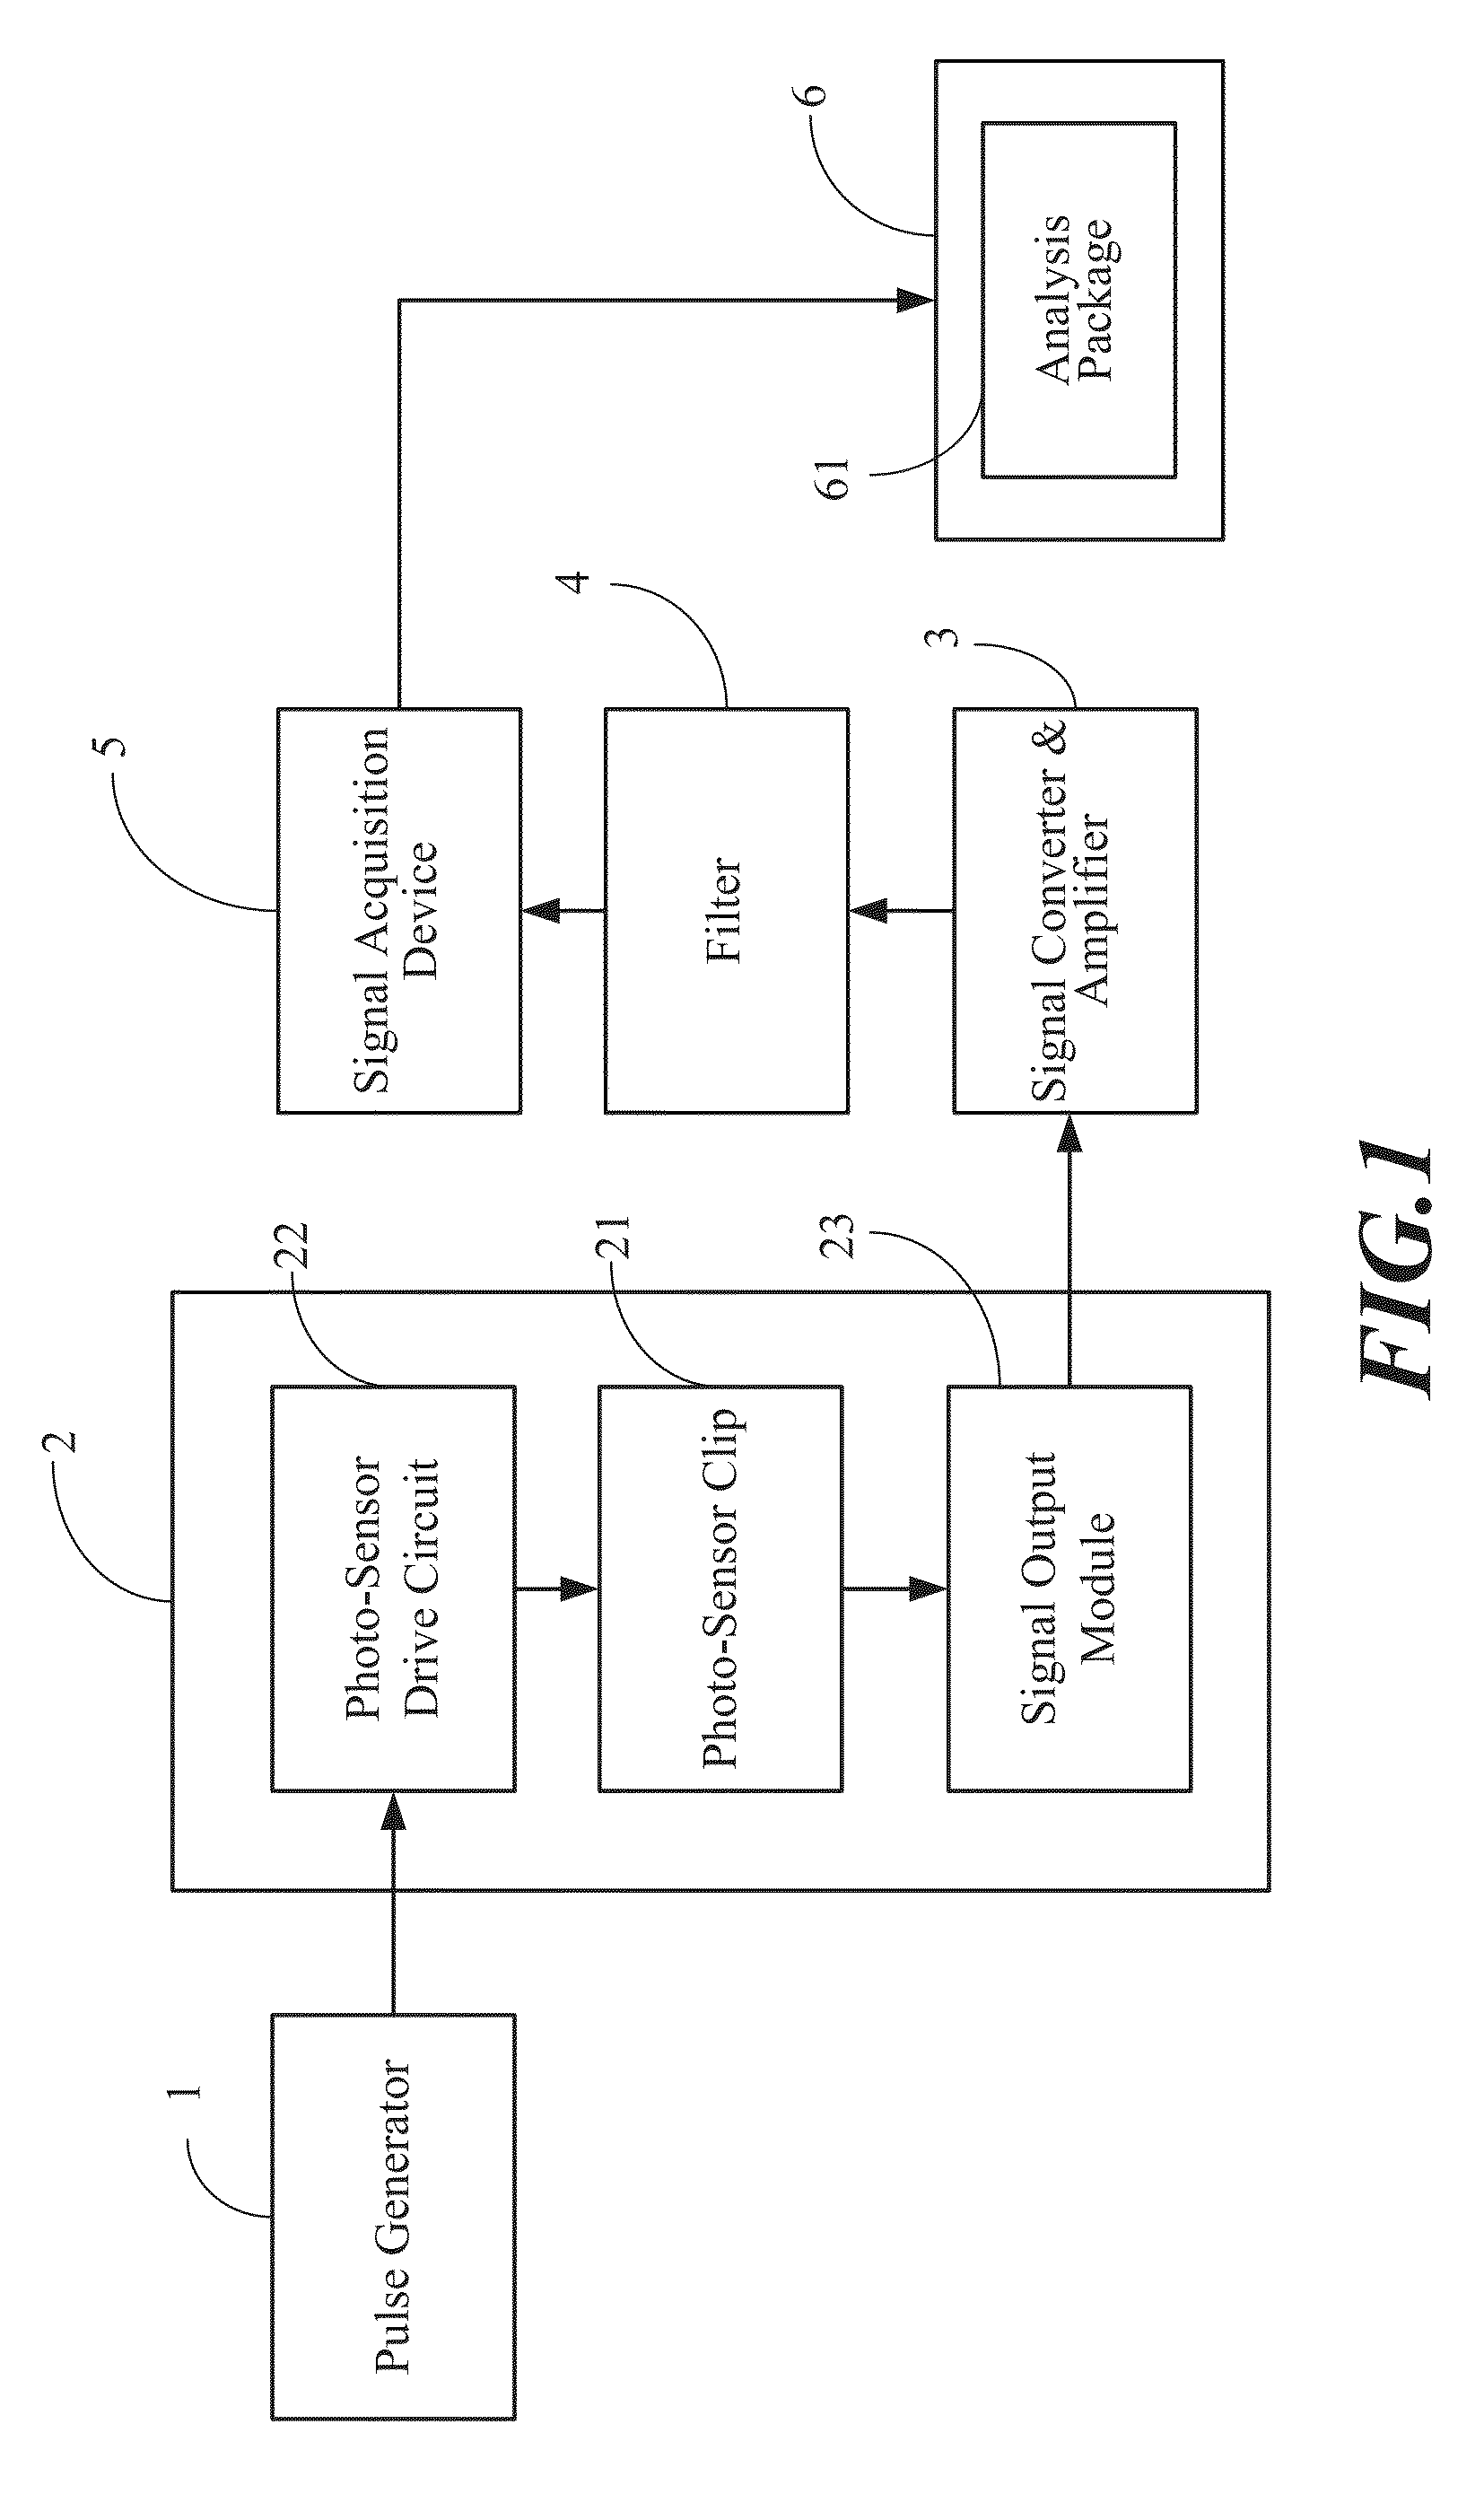 Psychological stress index measuring system and analysis method